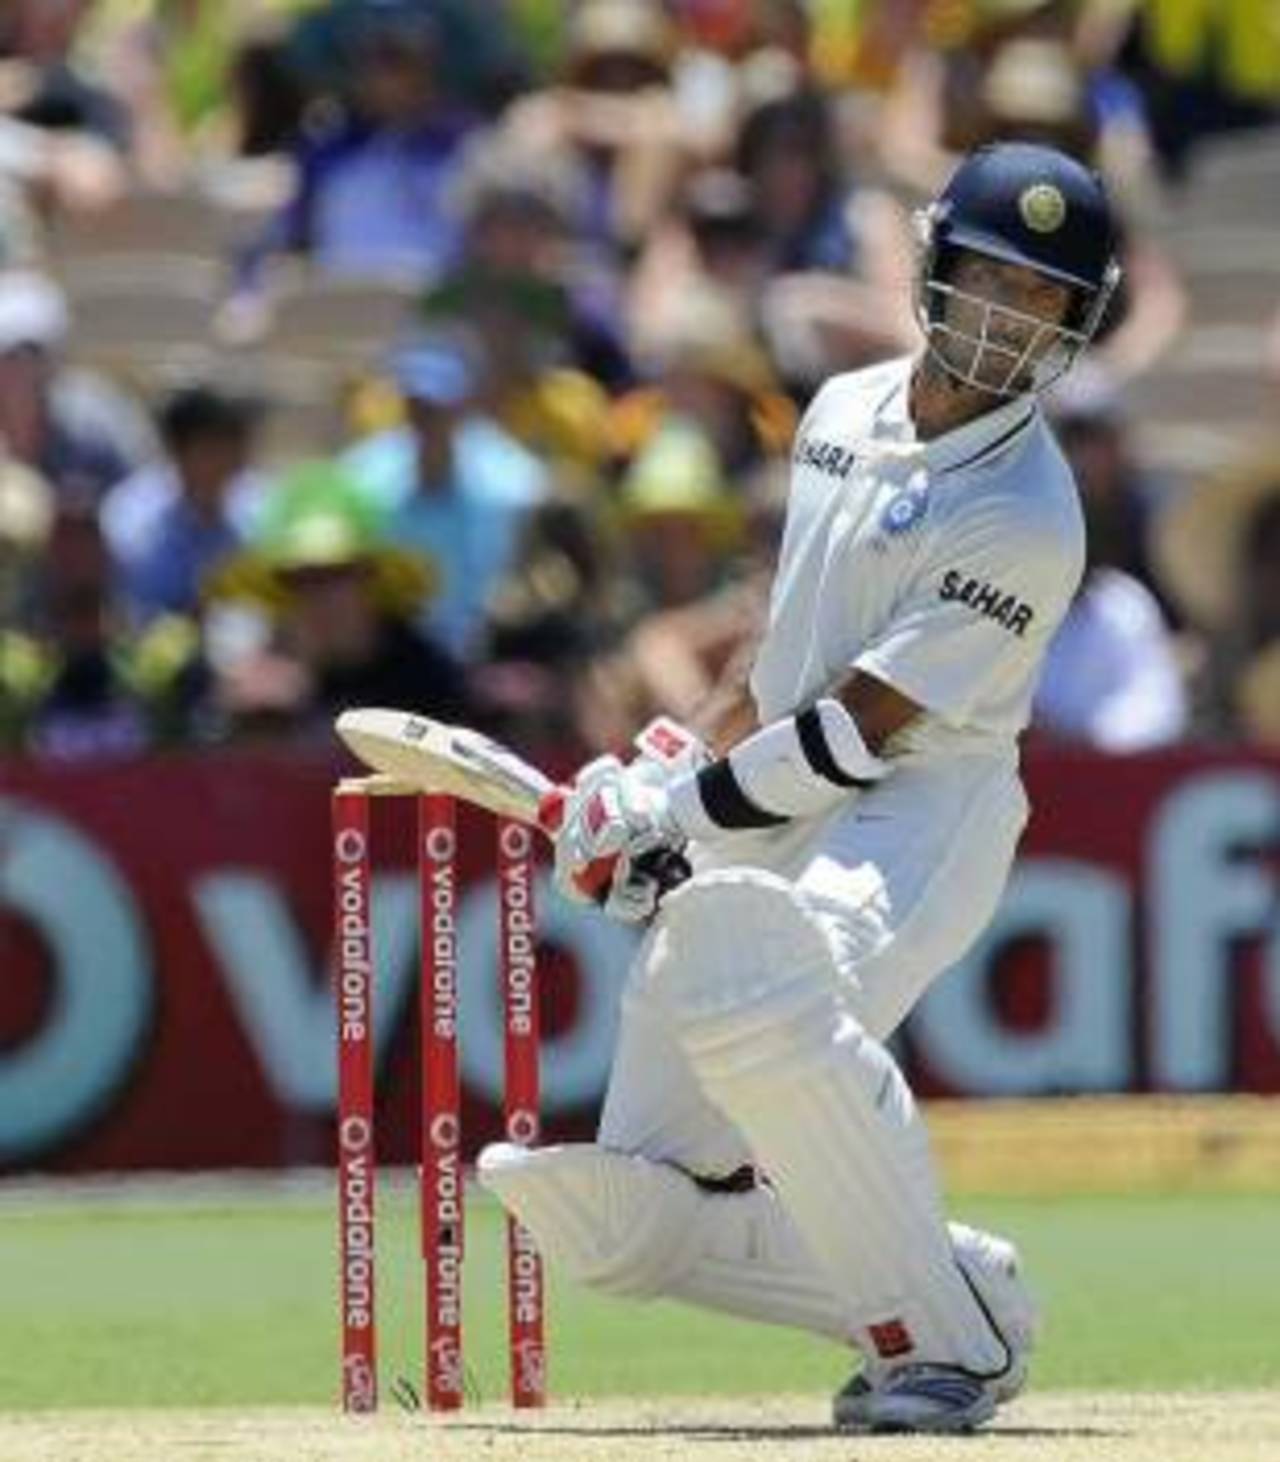 'The Adelaide innings gave me confidence that I can play at the highest level' - Wriddhiman Saha&nbsp;&nbsp;&bull;&nbsp;&nbsp;Associated Press